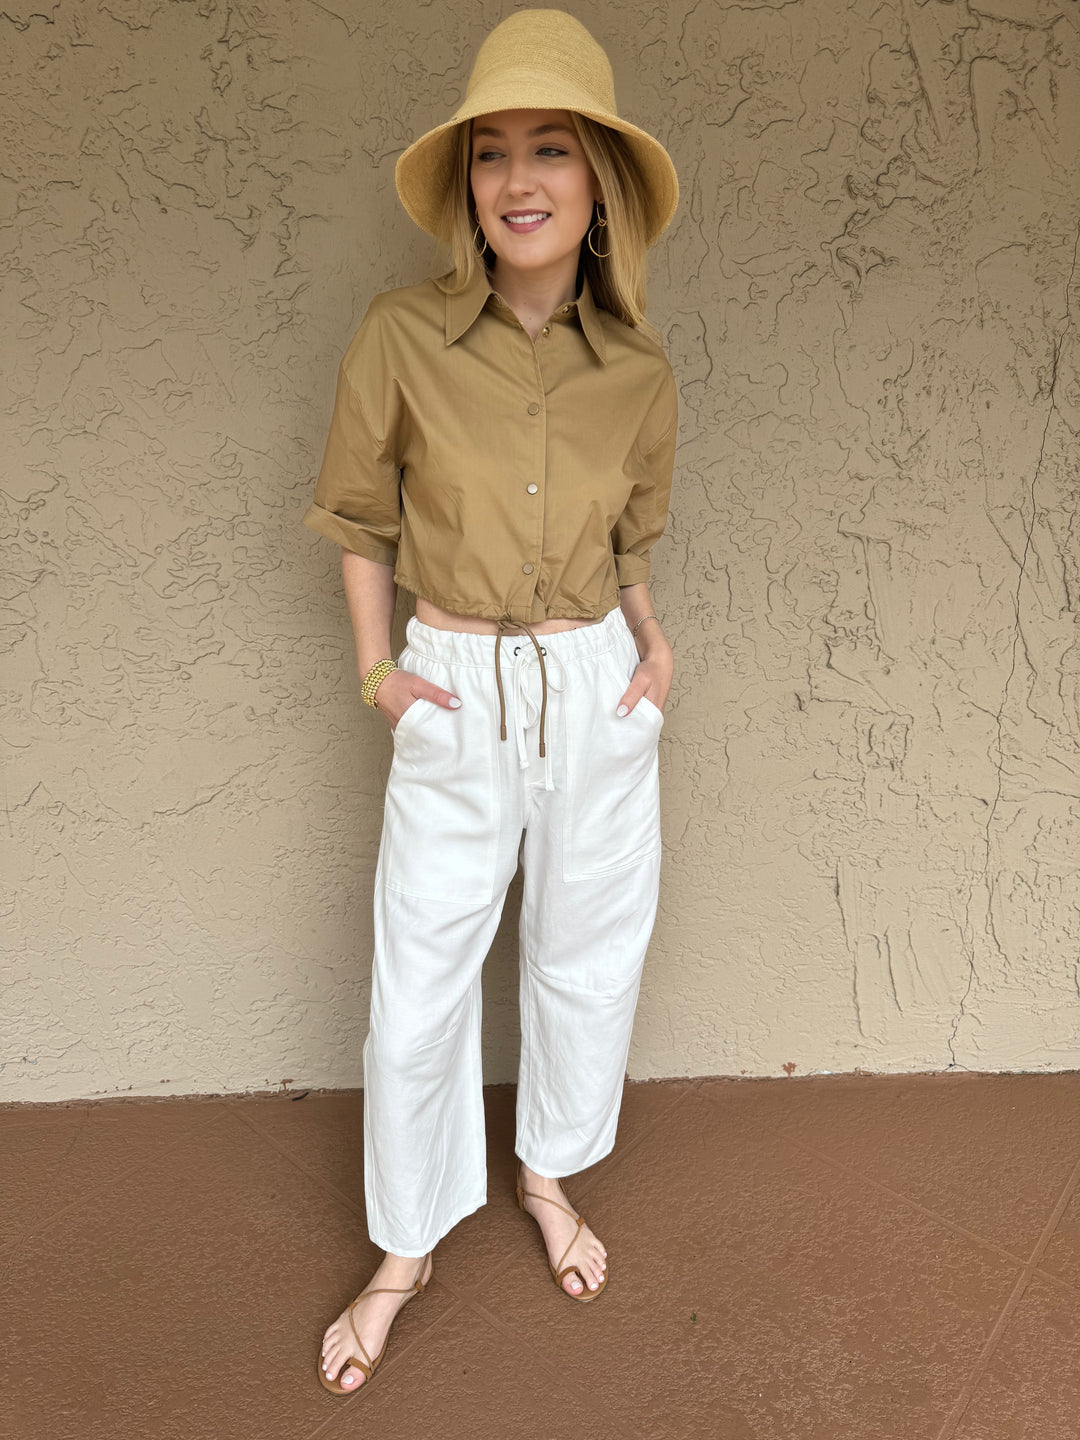 Suncoo Camel Lucie Top & Enza Costa Twill Utility Pants